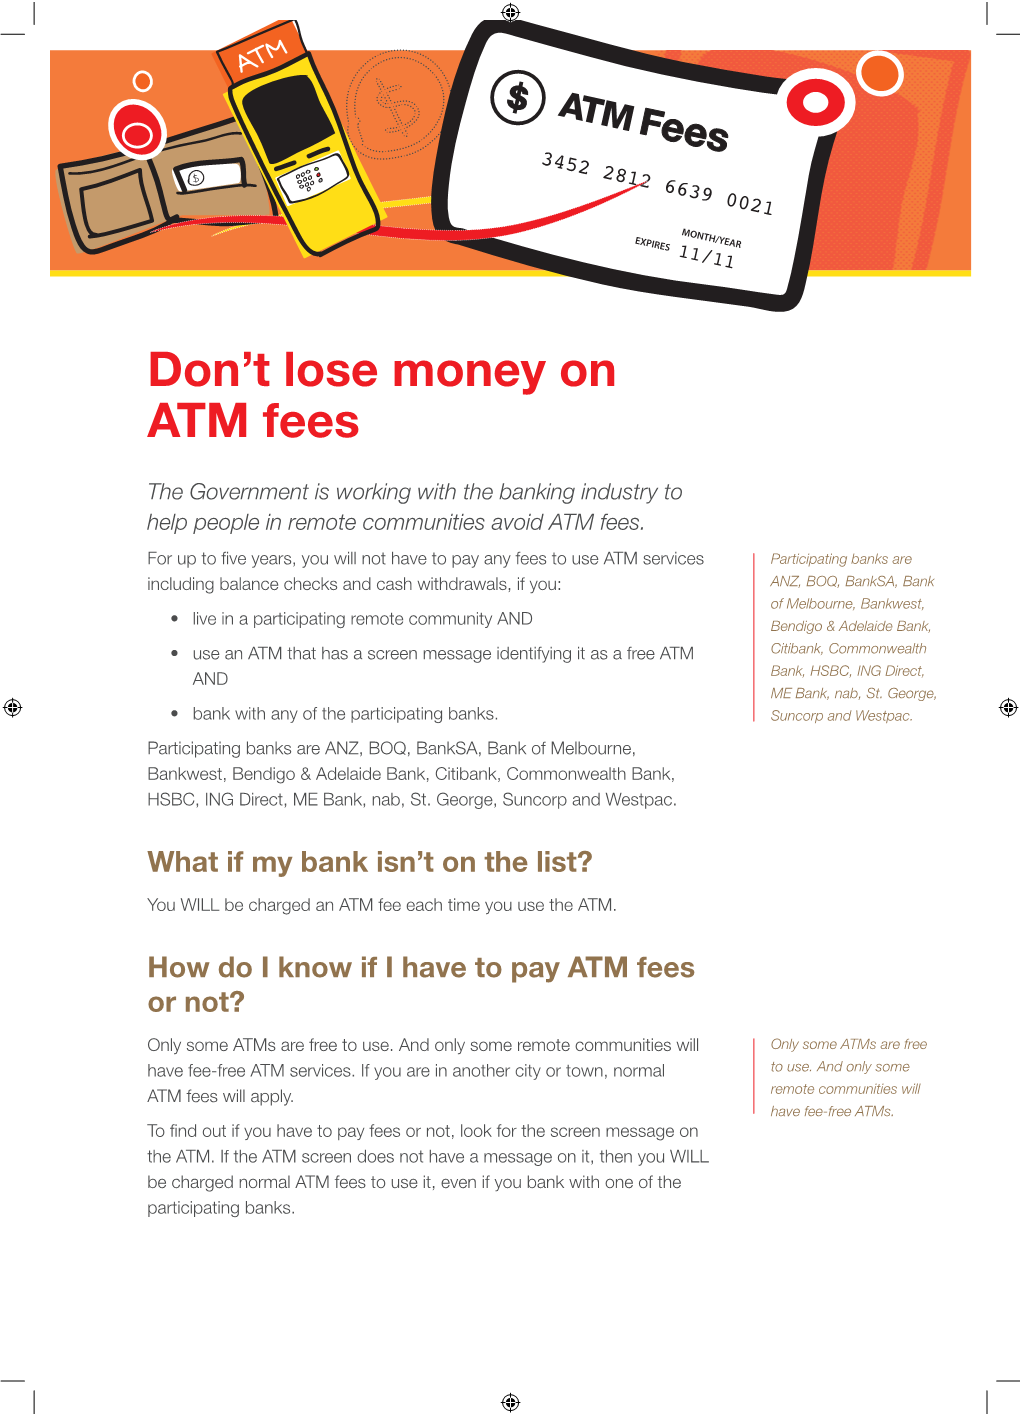 Don't Lose Money on ATM Fees